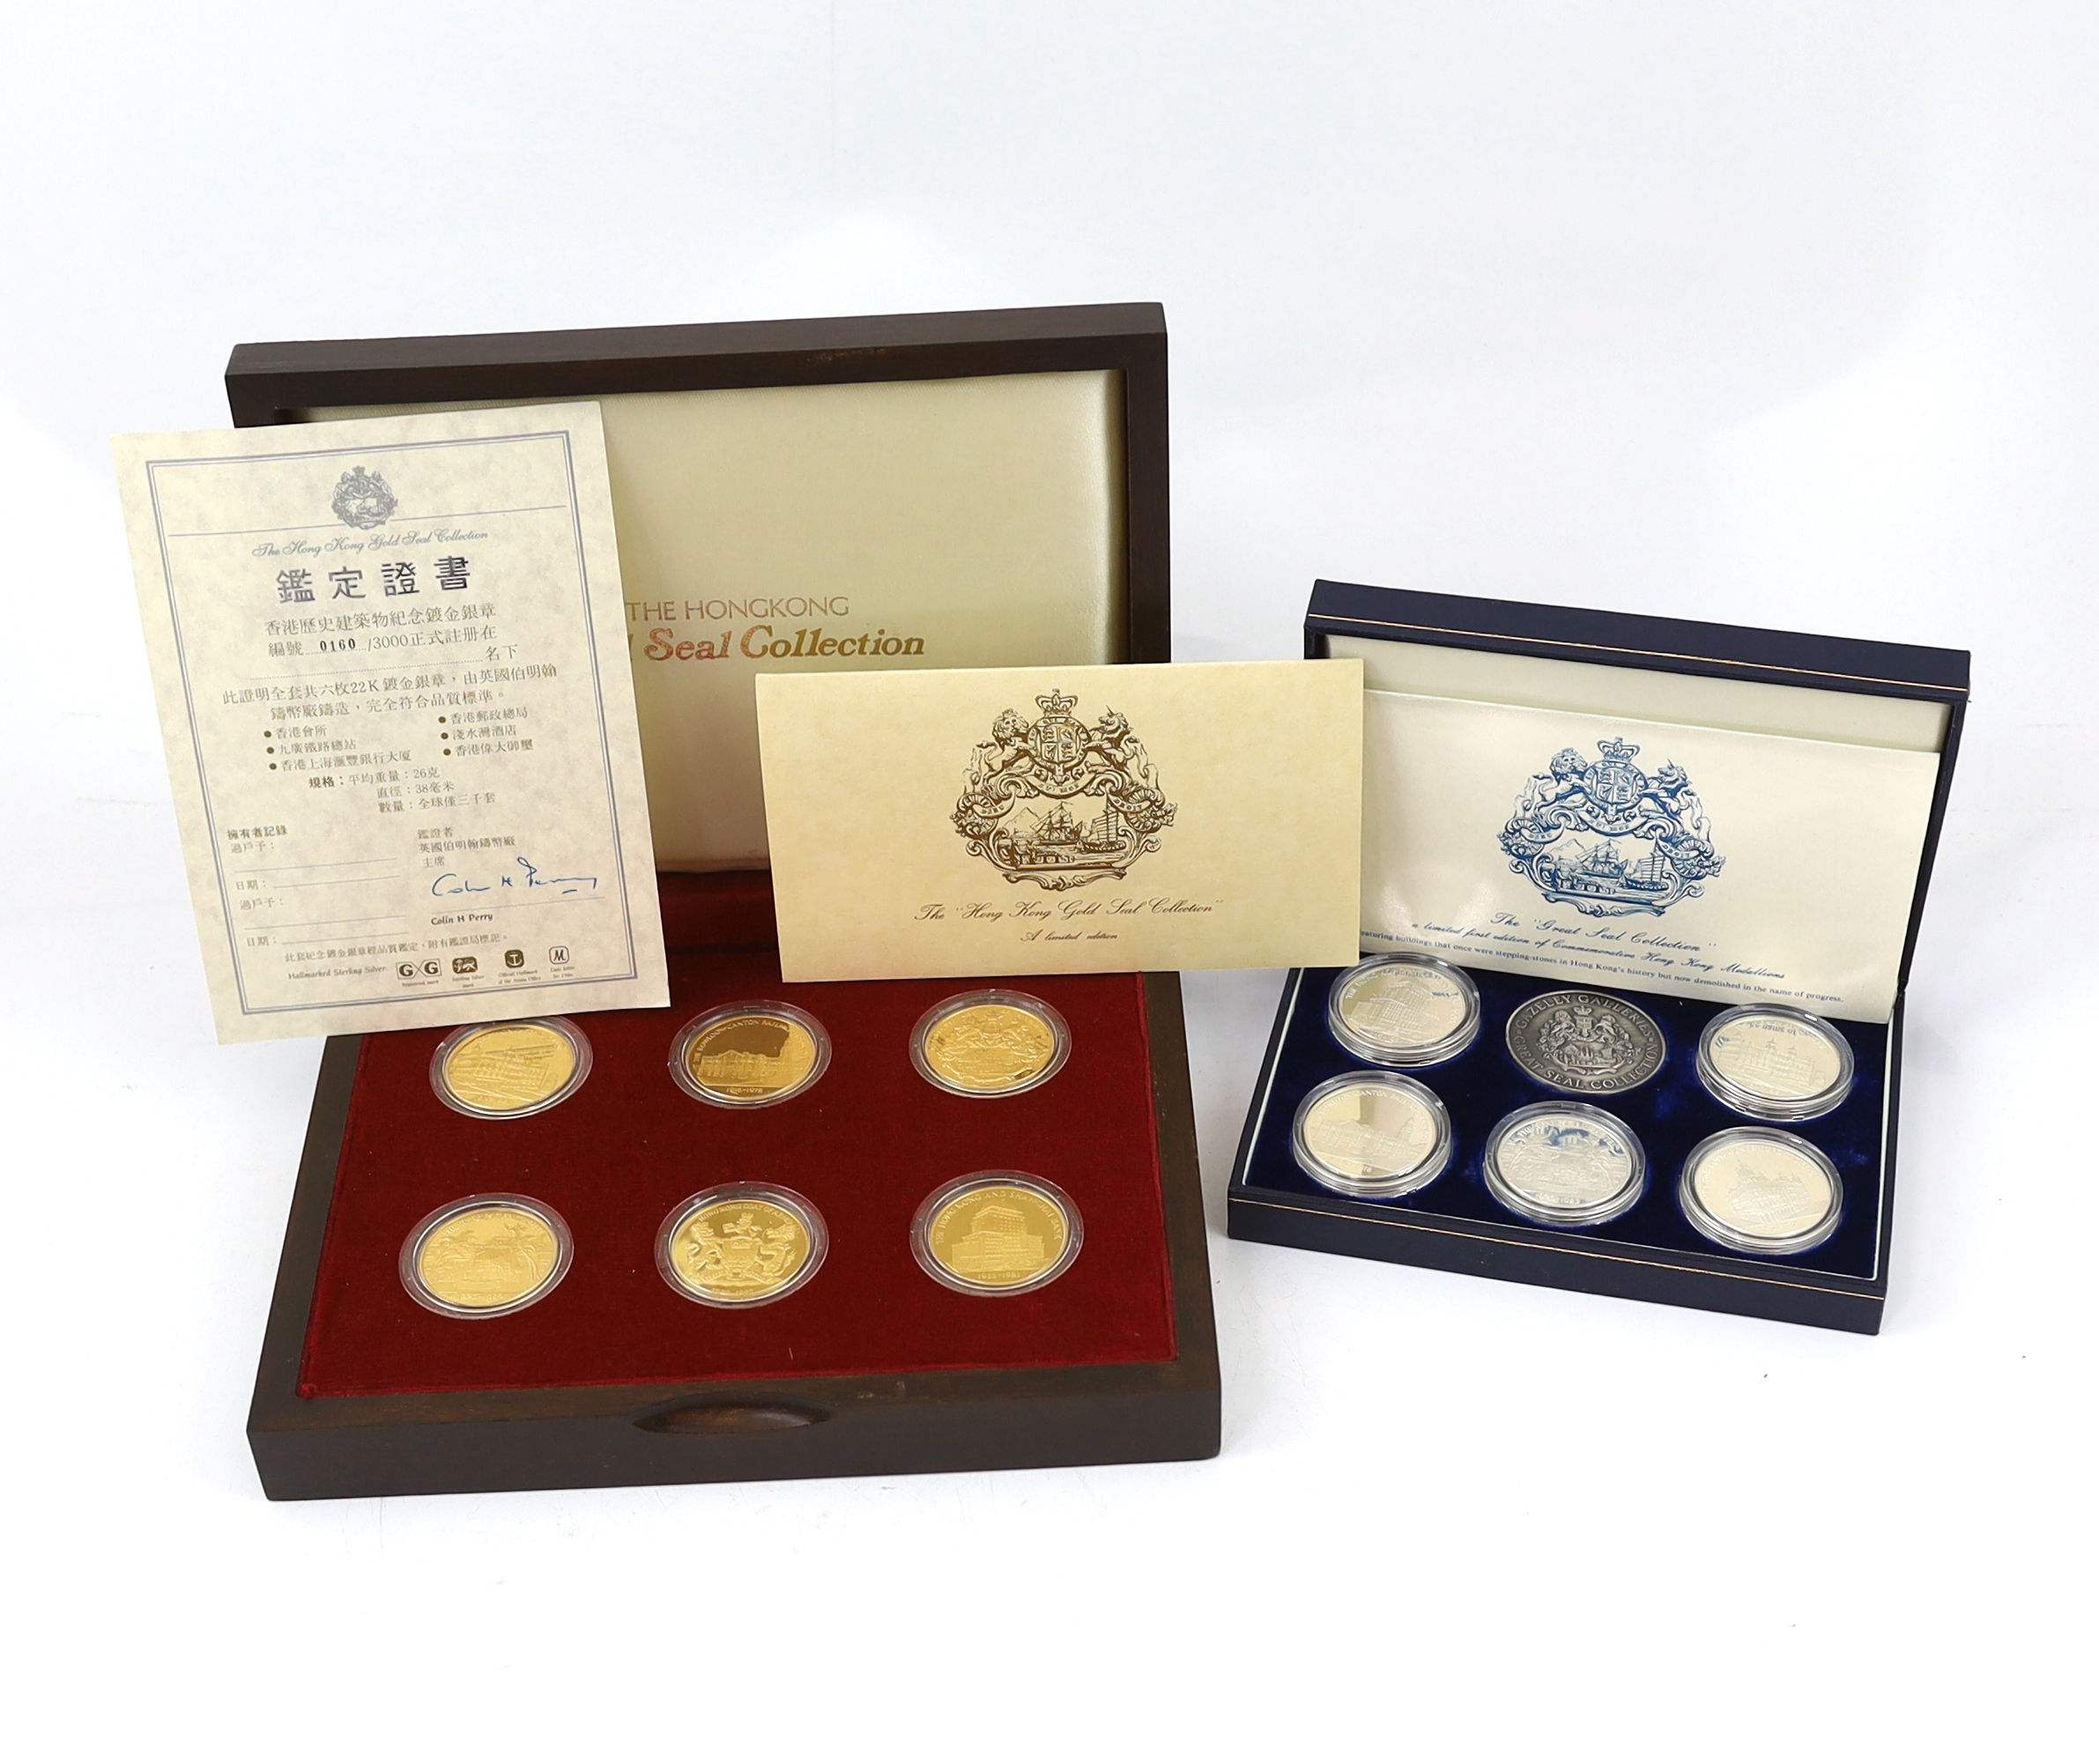 Hong Kong medals, the Gold Seal collection of six silver-gilt medals, and the Great Seal collection of five proof silver medals, produced by Gazeley Galleries